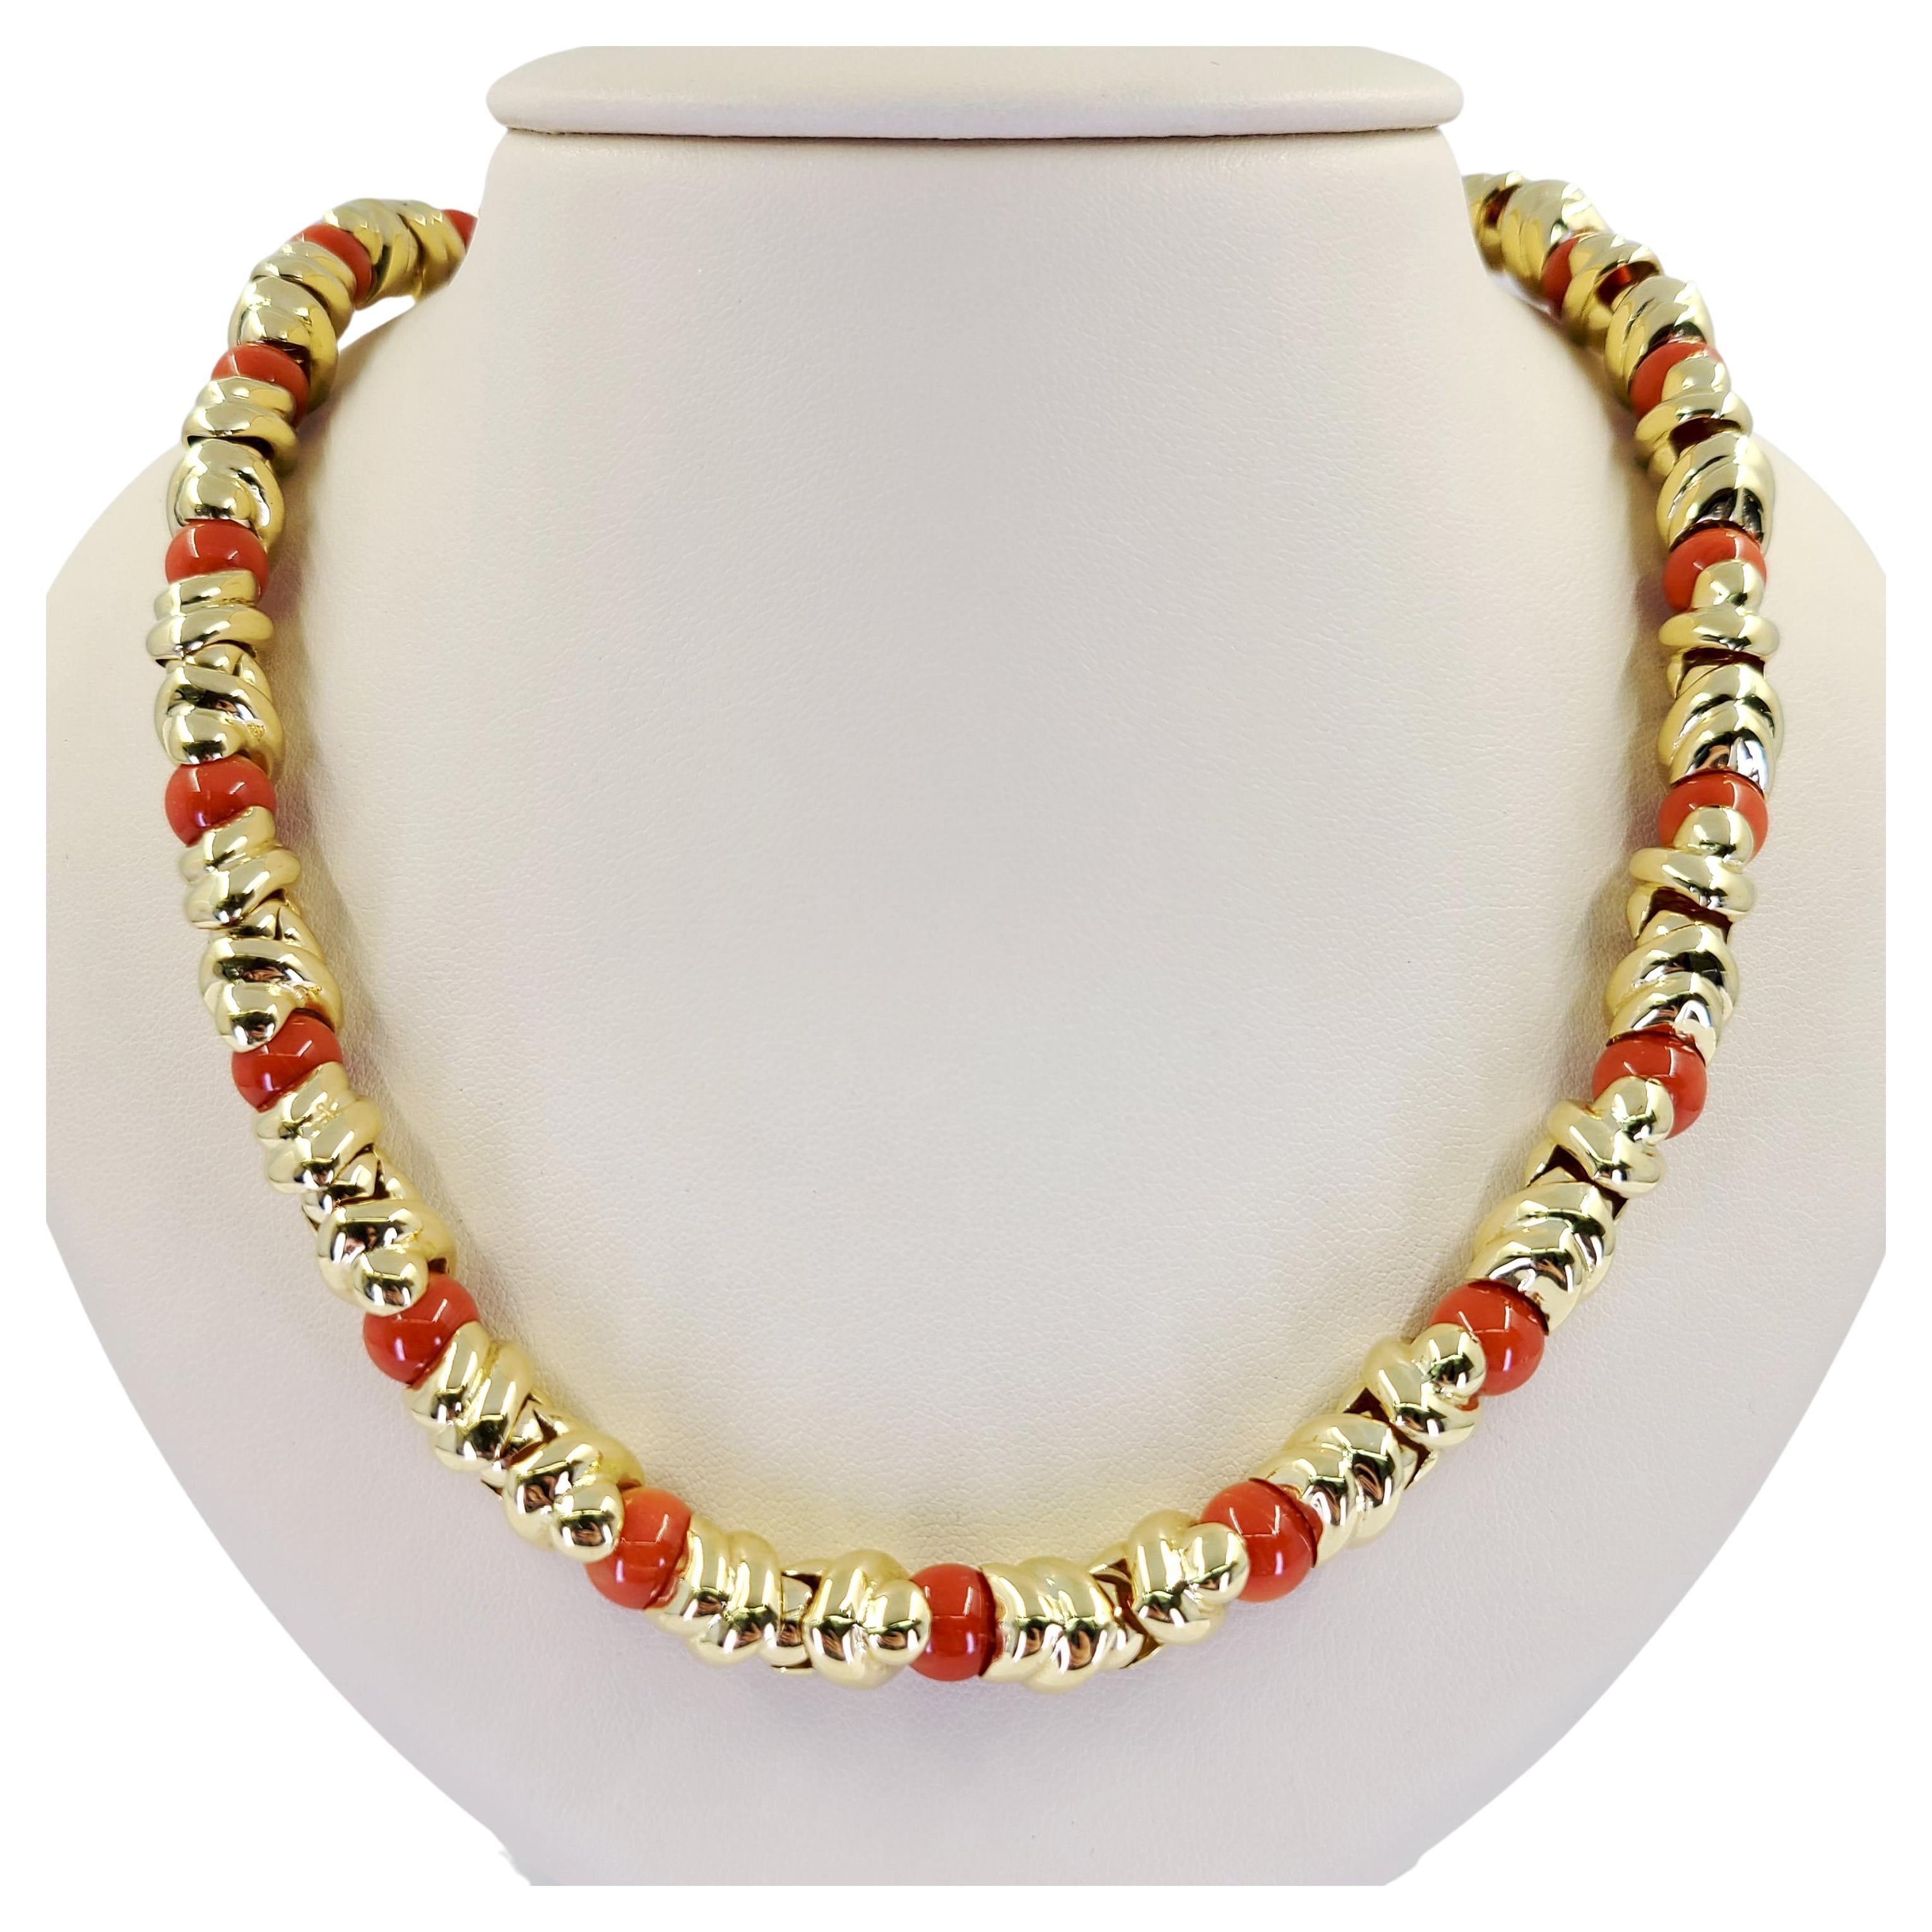 Yellow Gold and Coral Bead Necklace